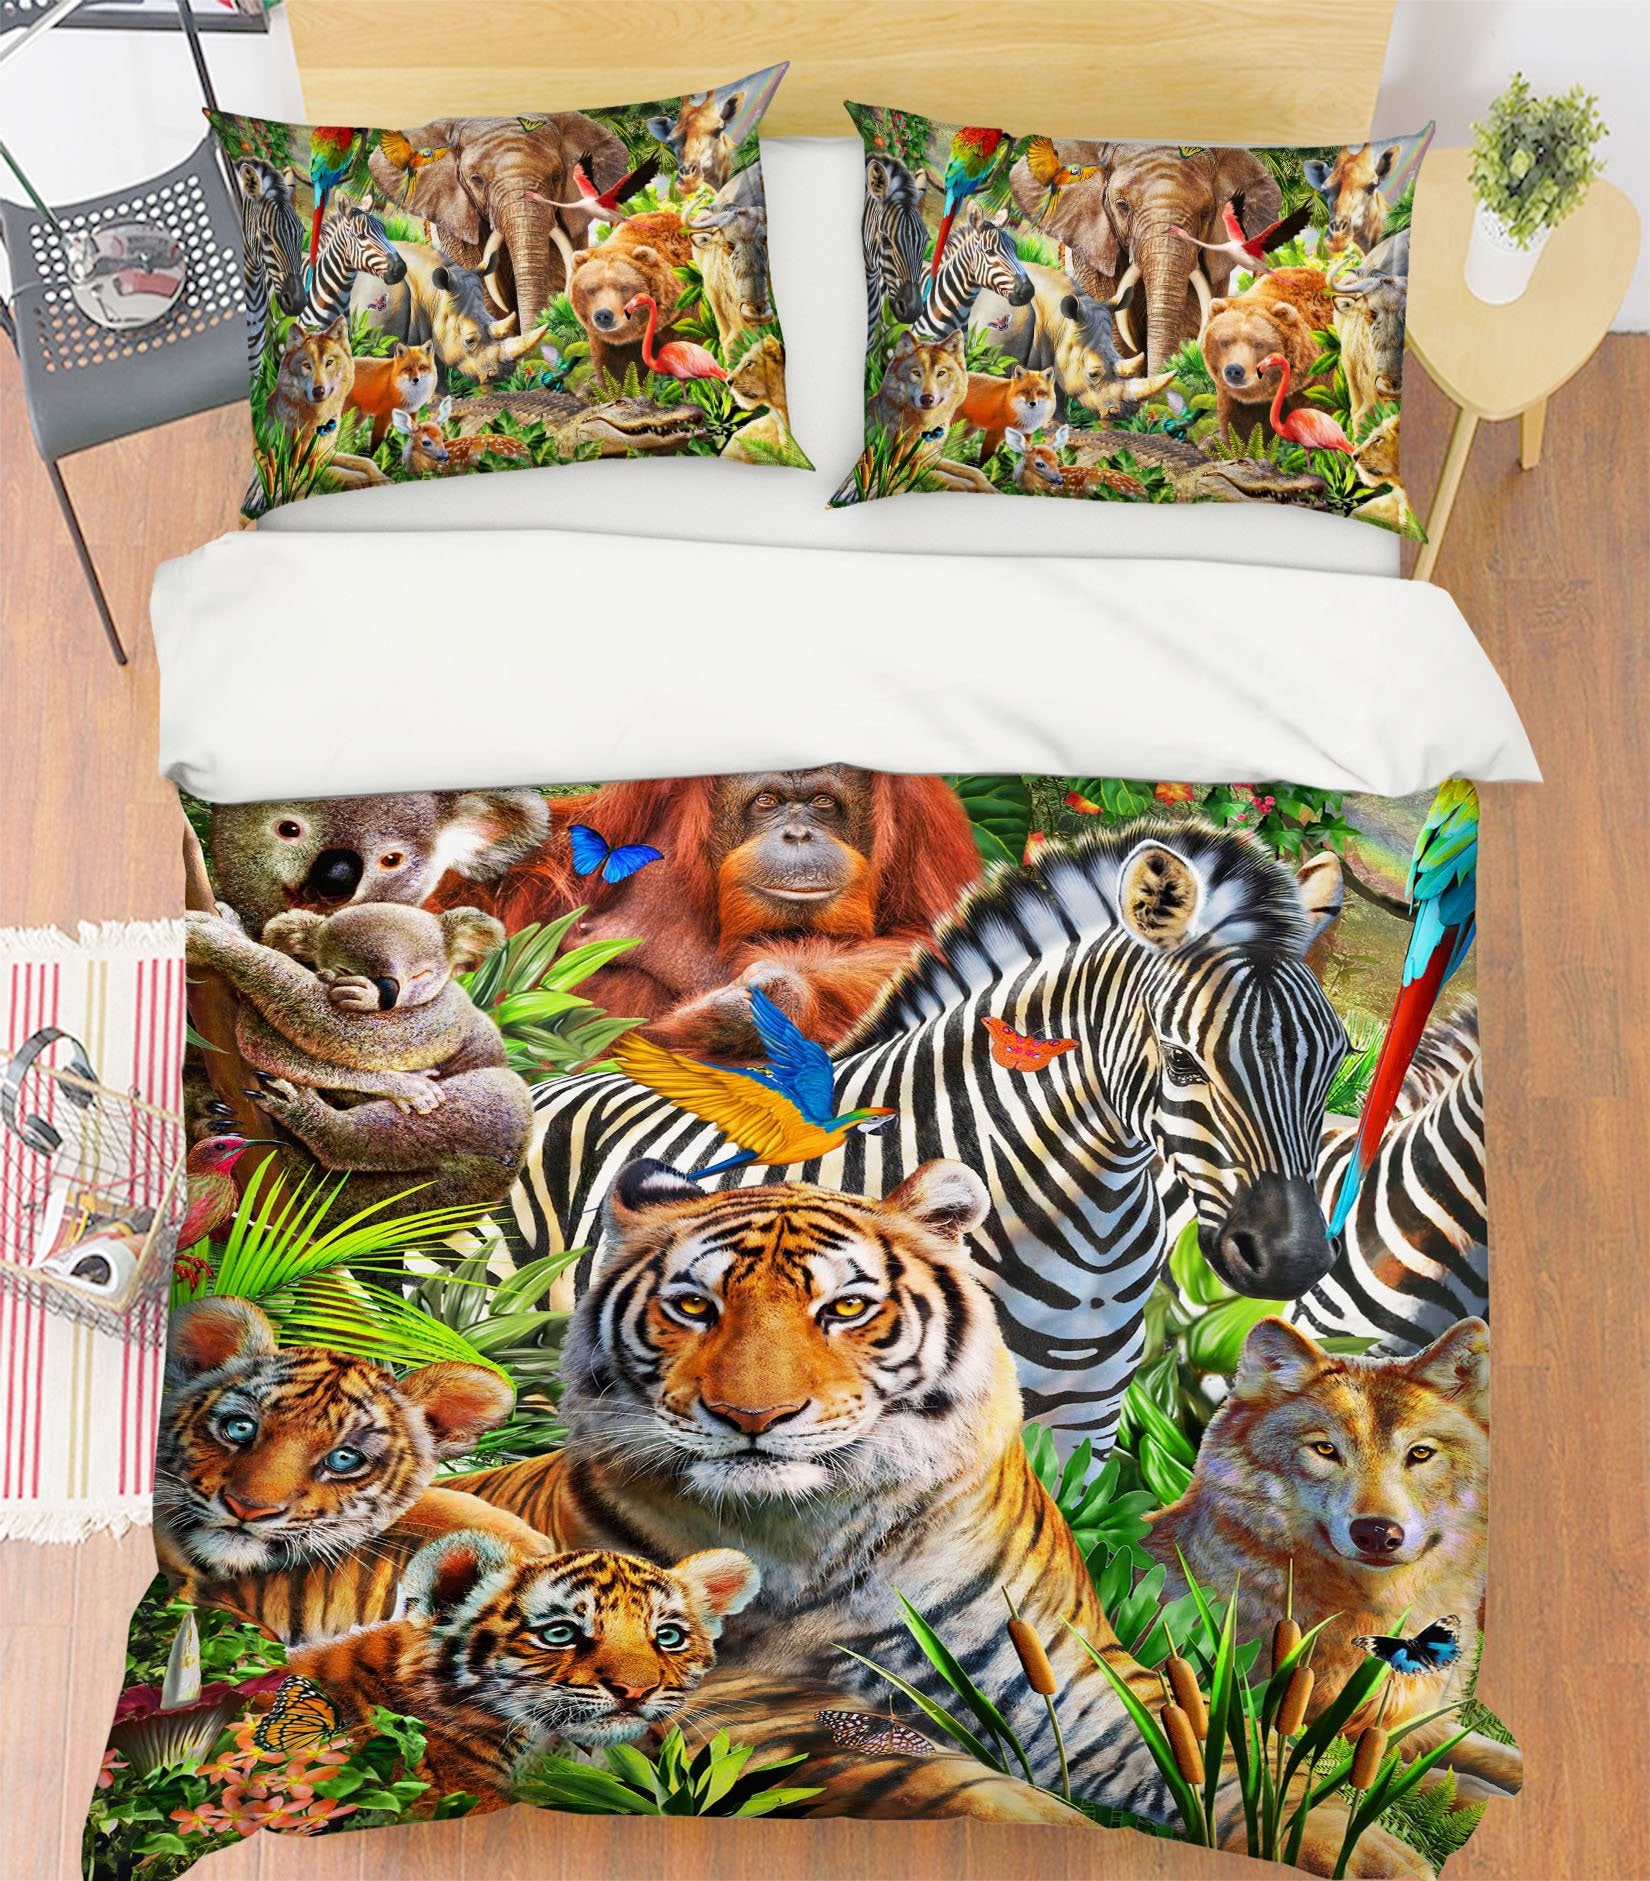 3D Animal World 2130 Adrian Chesterman Bedding Bed Pillowcases Quilt Quiet Covers AJ Creativity Home 